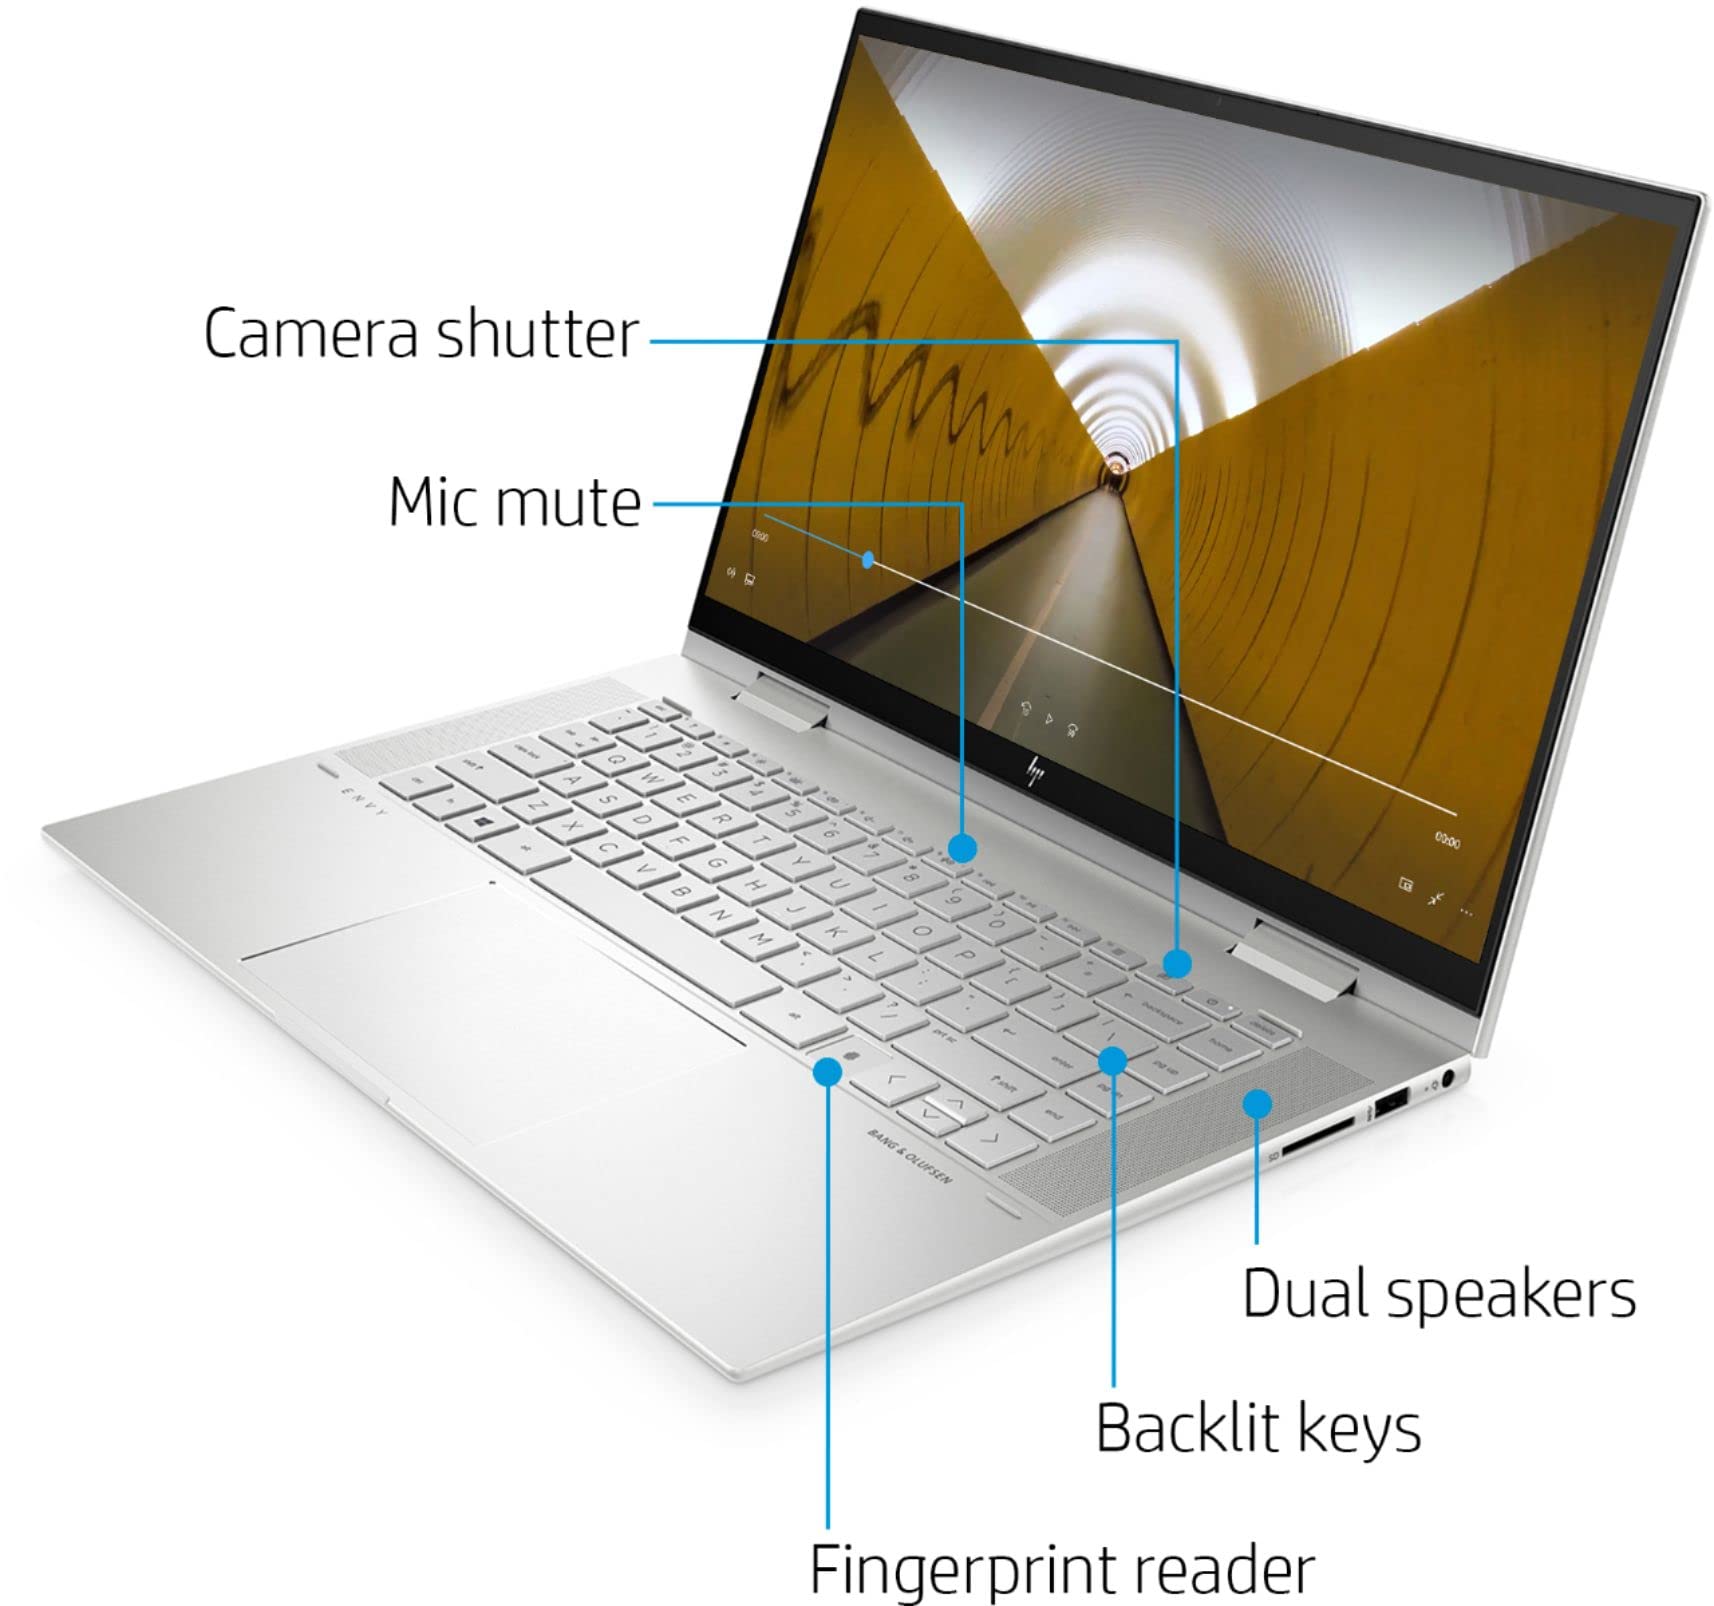 HP Envy X360 2-in-1 Laptop 2022, 15.6" FHD IPS Touchscreen, 11th Intel i7-1195G7, Iris Xe Graphics, 32GB DDR4 1TB SSD, Thunderbolt 4 WiFi 6 Backlit KB FP Reader, Win 11 Home, Stylus Pen, COU 32GB